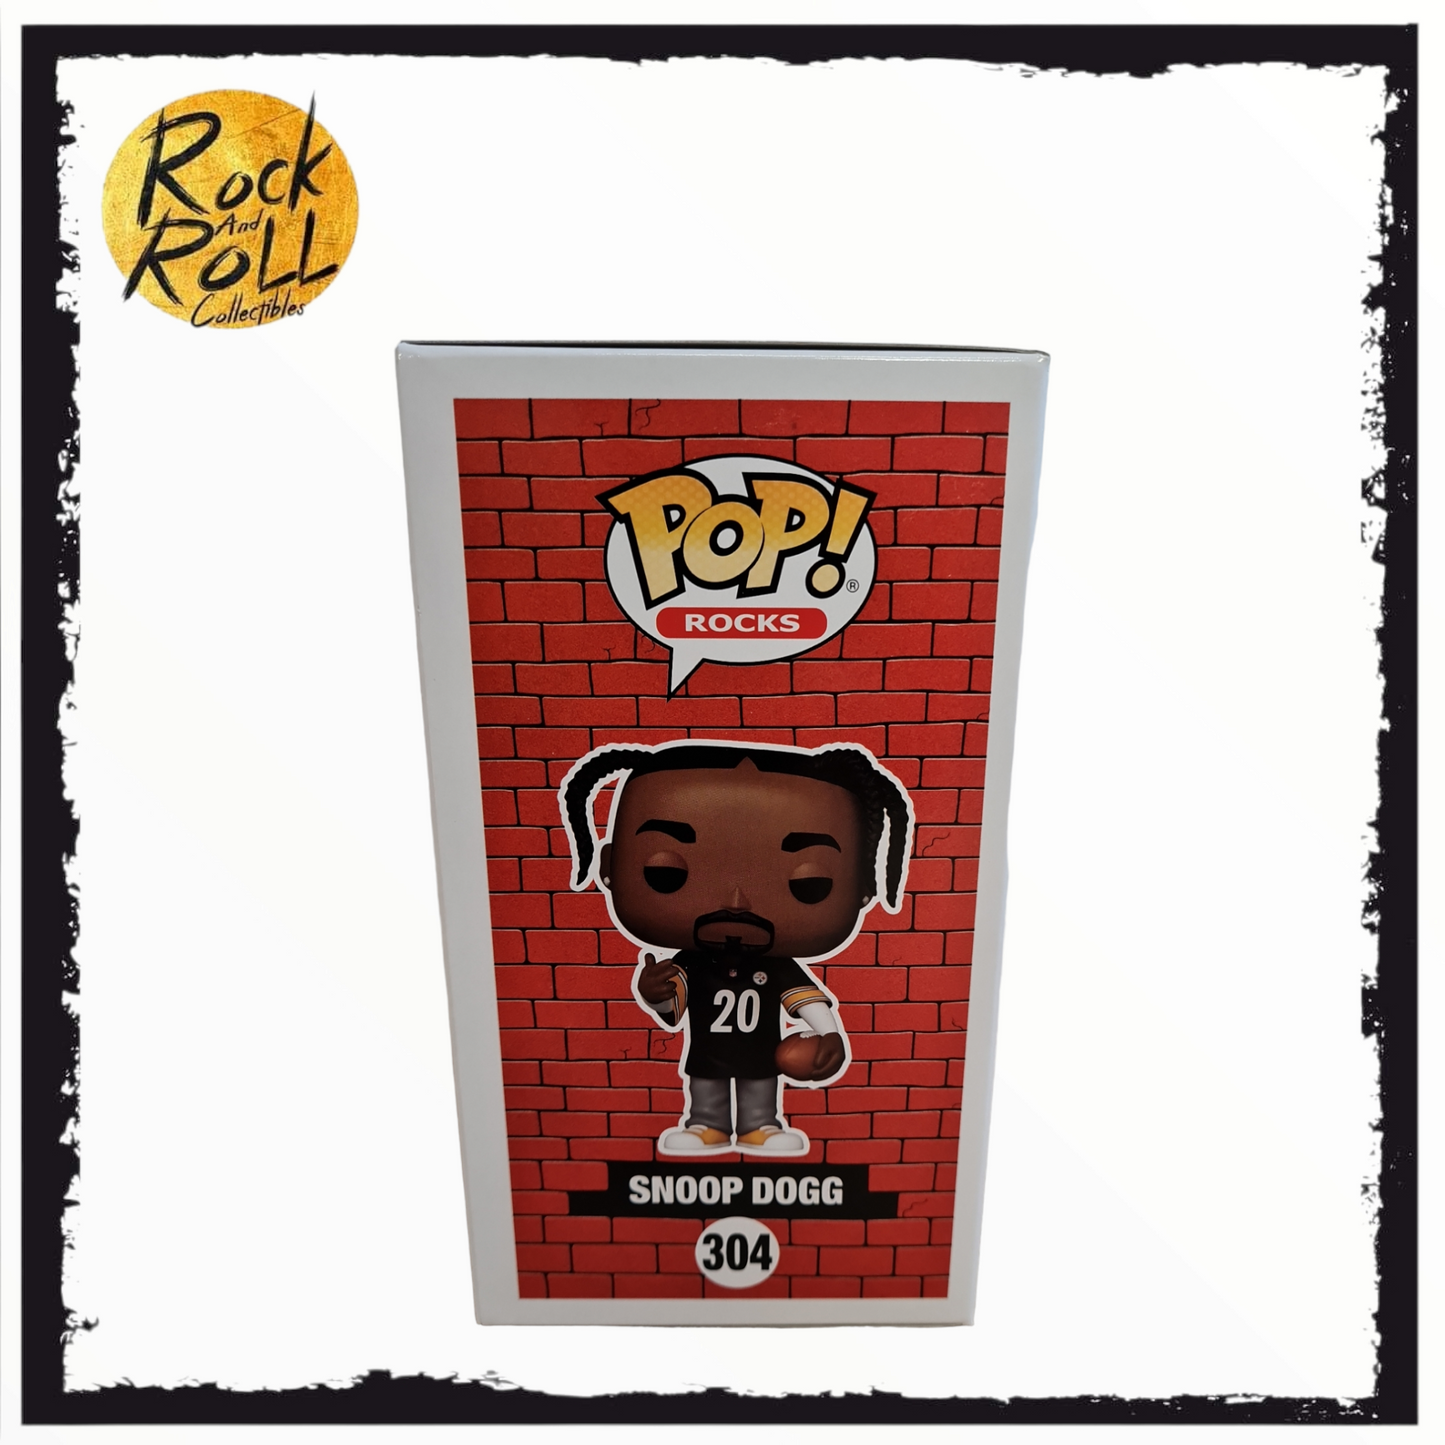 Snoop Dogg (Steelers Jersey) Funko Pop! #304 Rocks #304 The Dogg House X Funko Exclusive LE 15,000 Pieces.